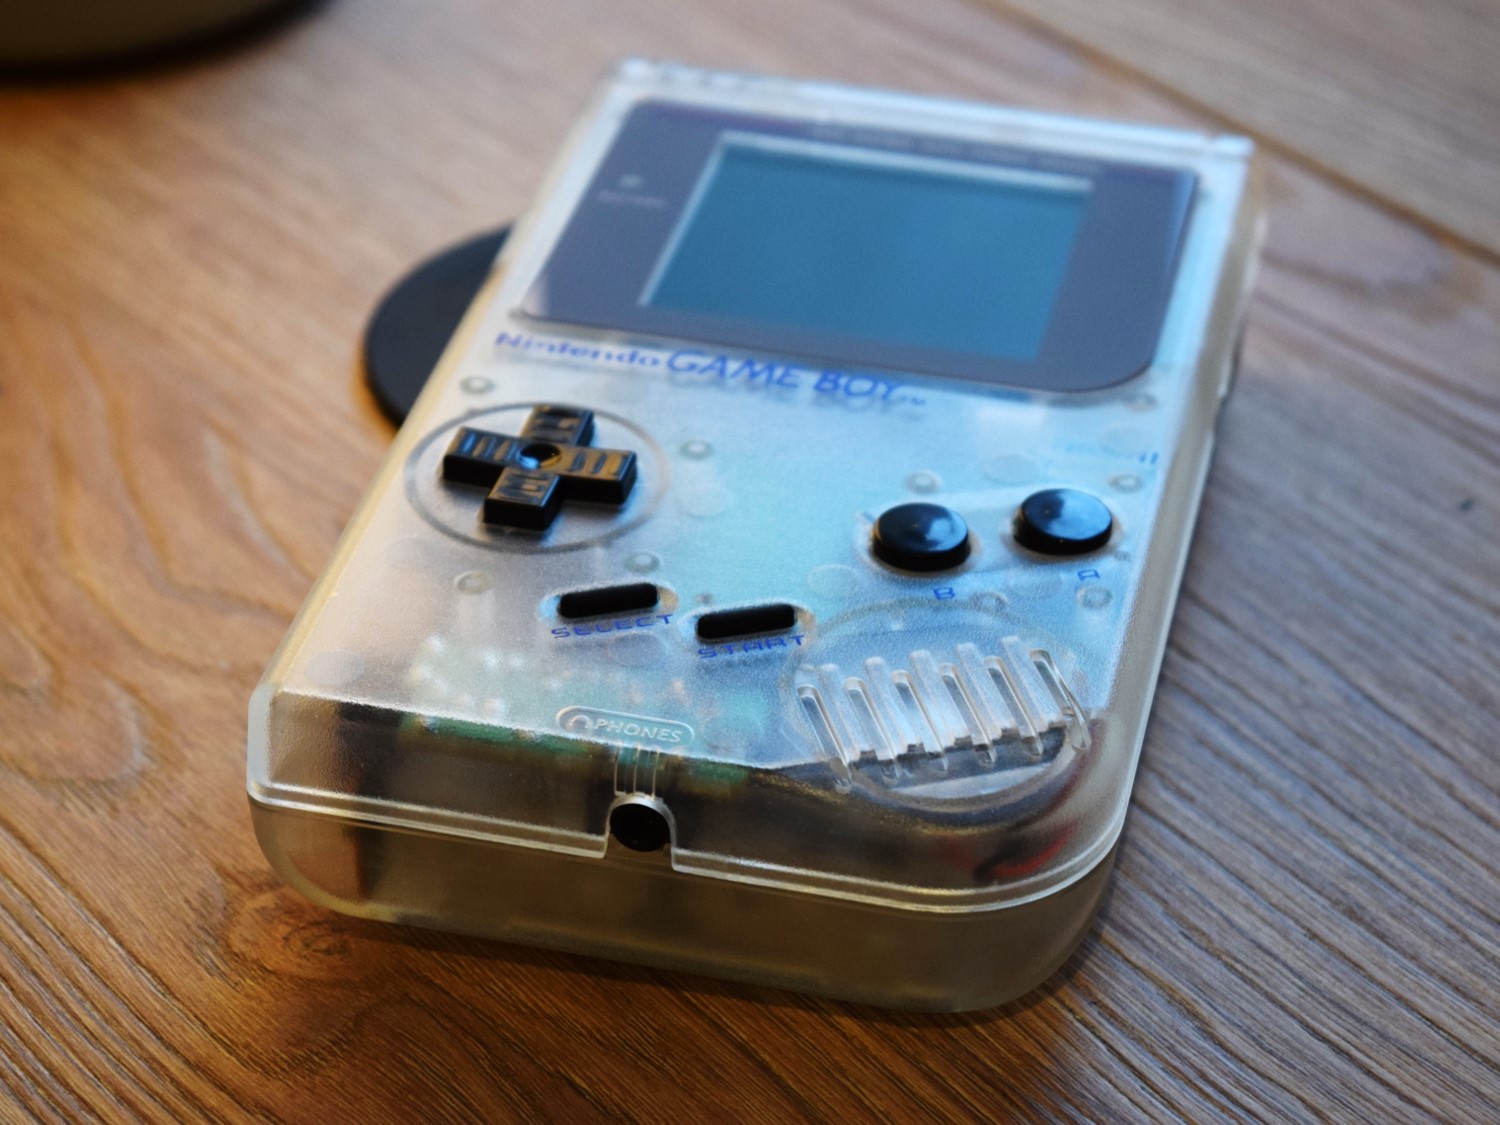 Gameboy Classic IPS Transparent Edition - Gameboy Classic Hardware - 3